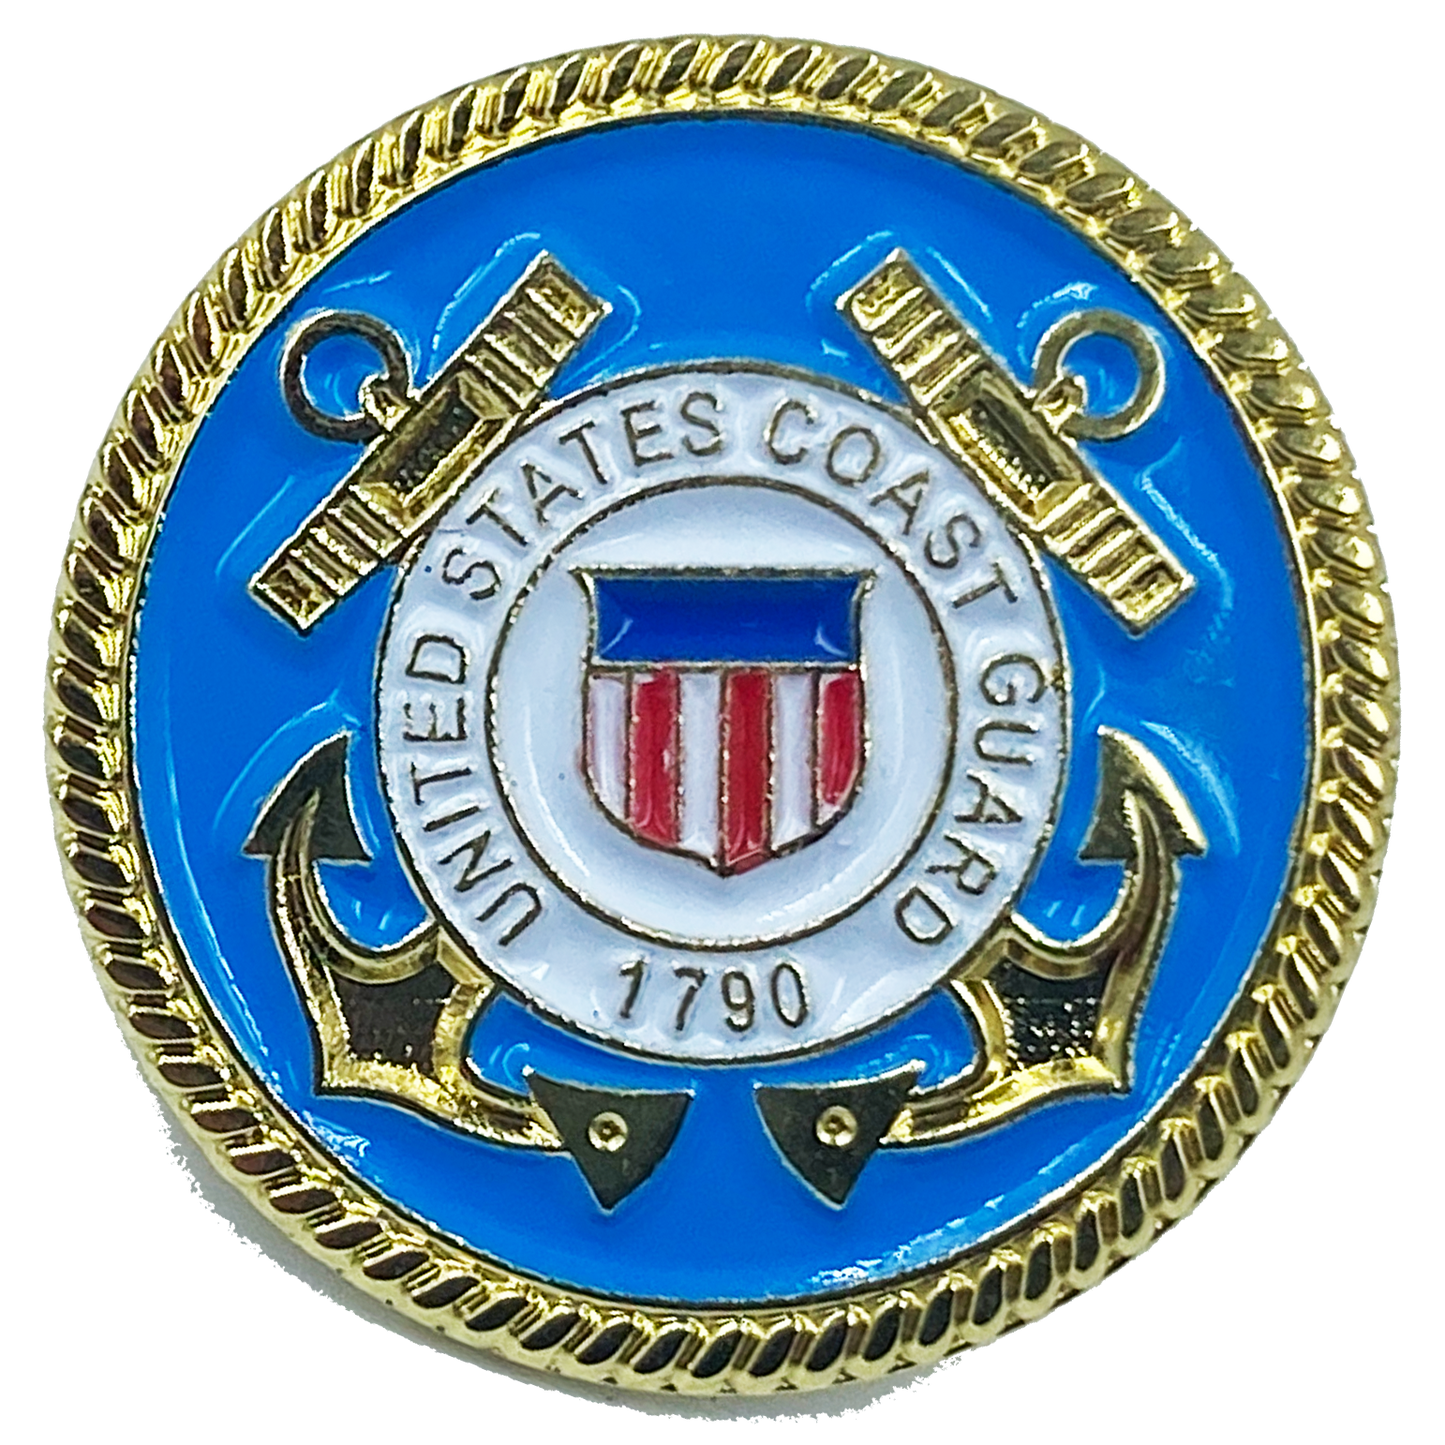 M-25 Coast Guard Lapel Pin with deluxe spring loaded clasp Coastie USCG